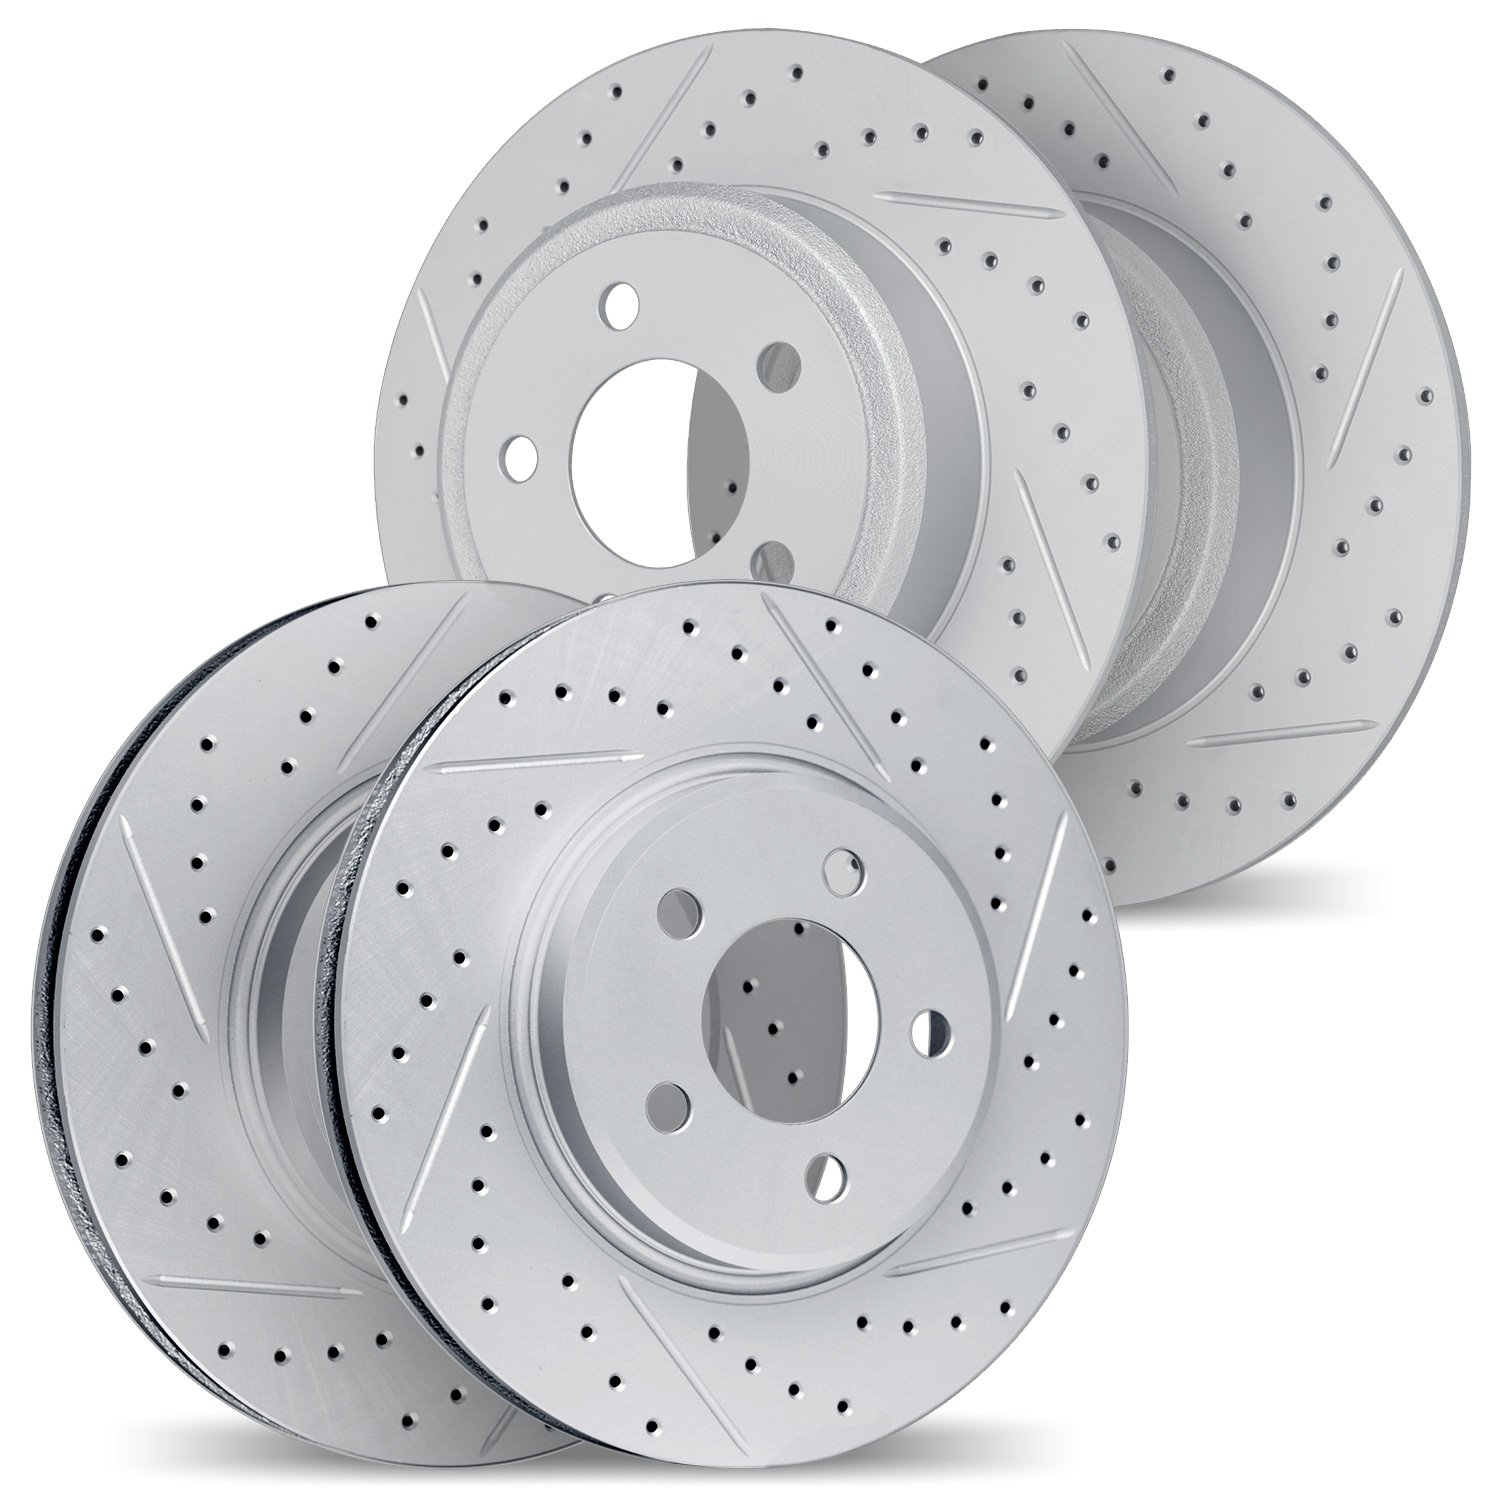 2004-76015 Geoperformance Drilled/Slotted Brake Rotors, 1999-2003 Lexus/Toyota/Scion, Position: Front and Rear